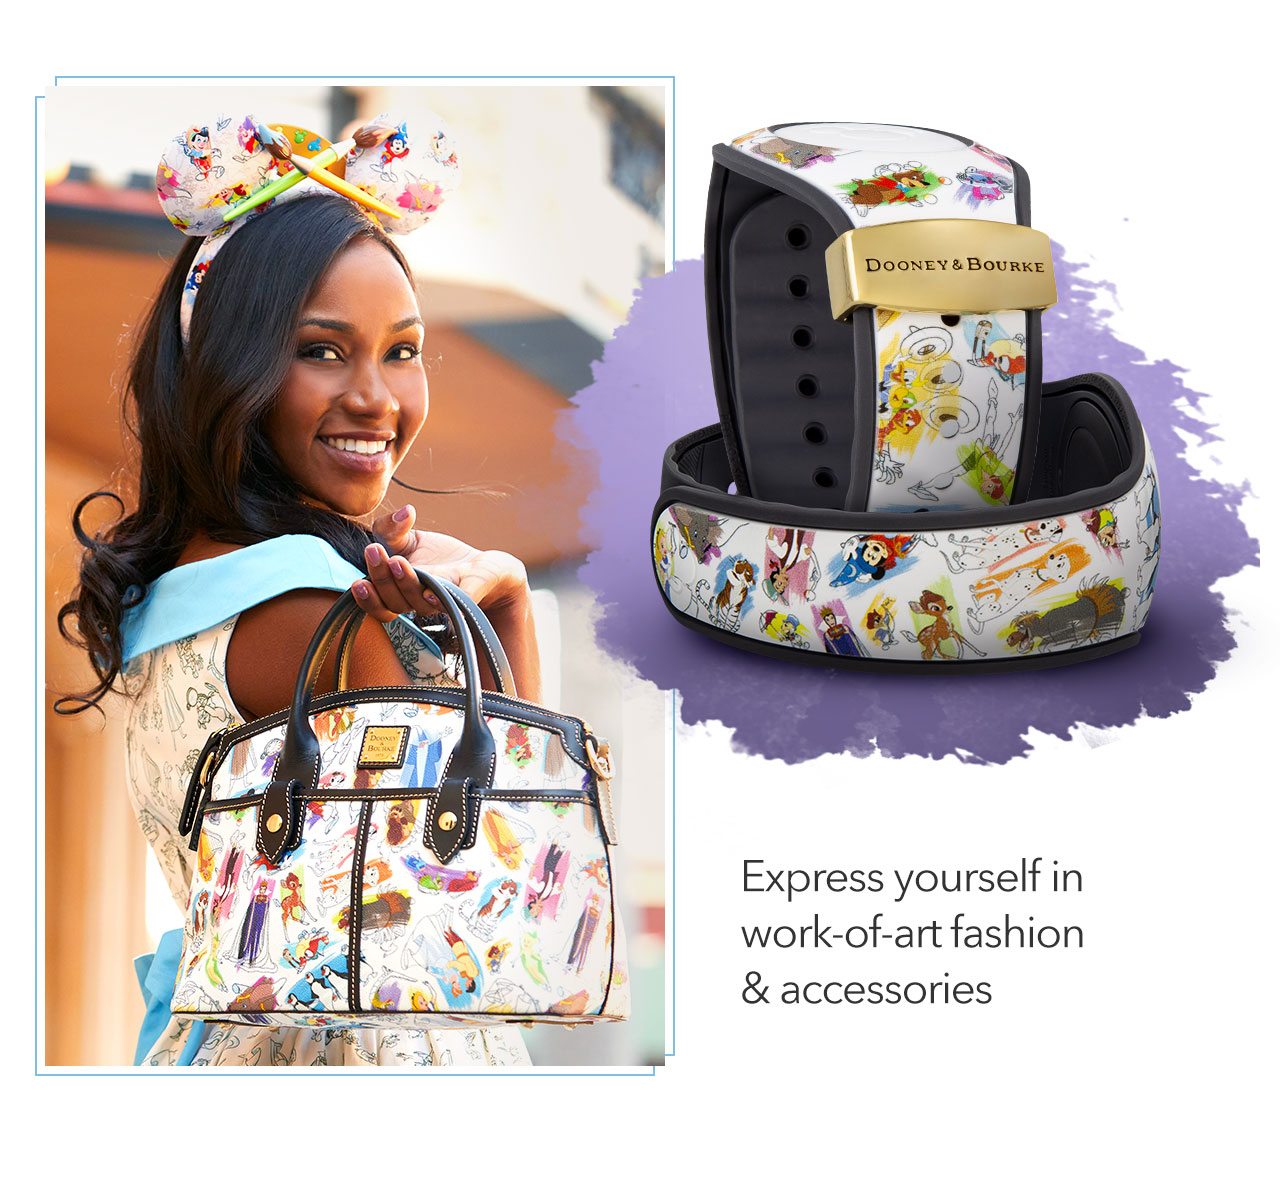 Express yourself in work-of-art fashion & accessories